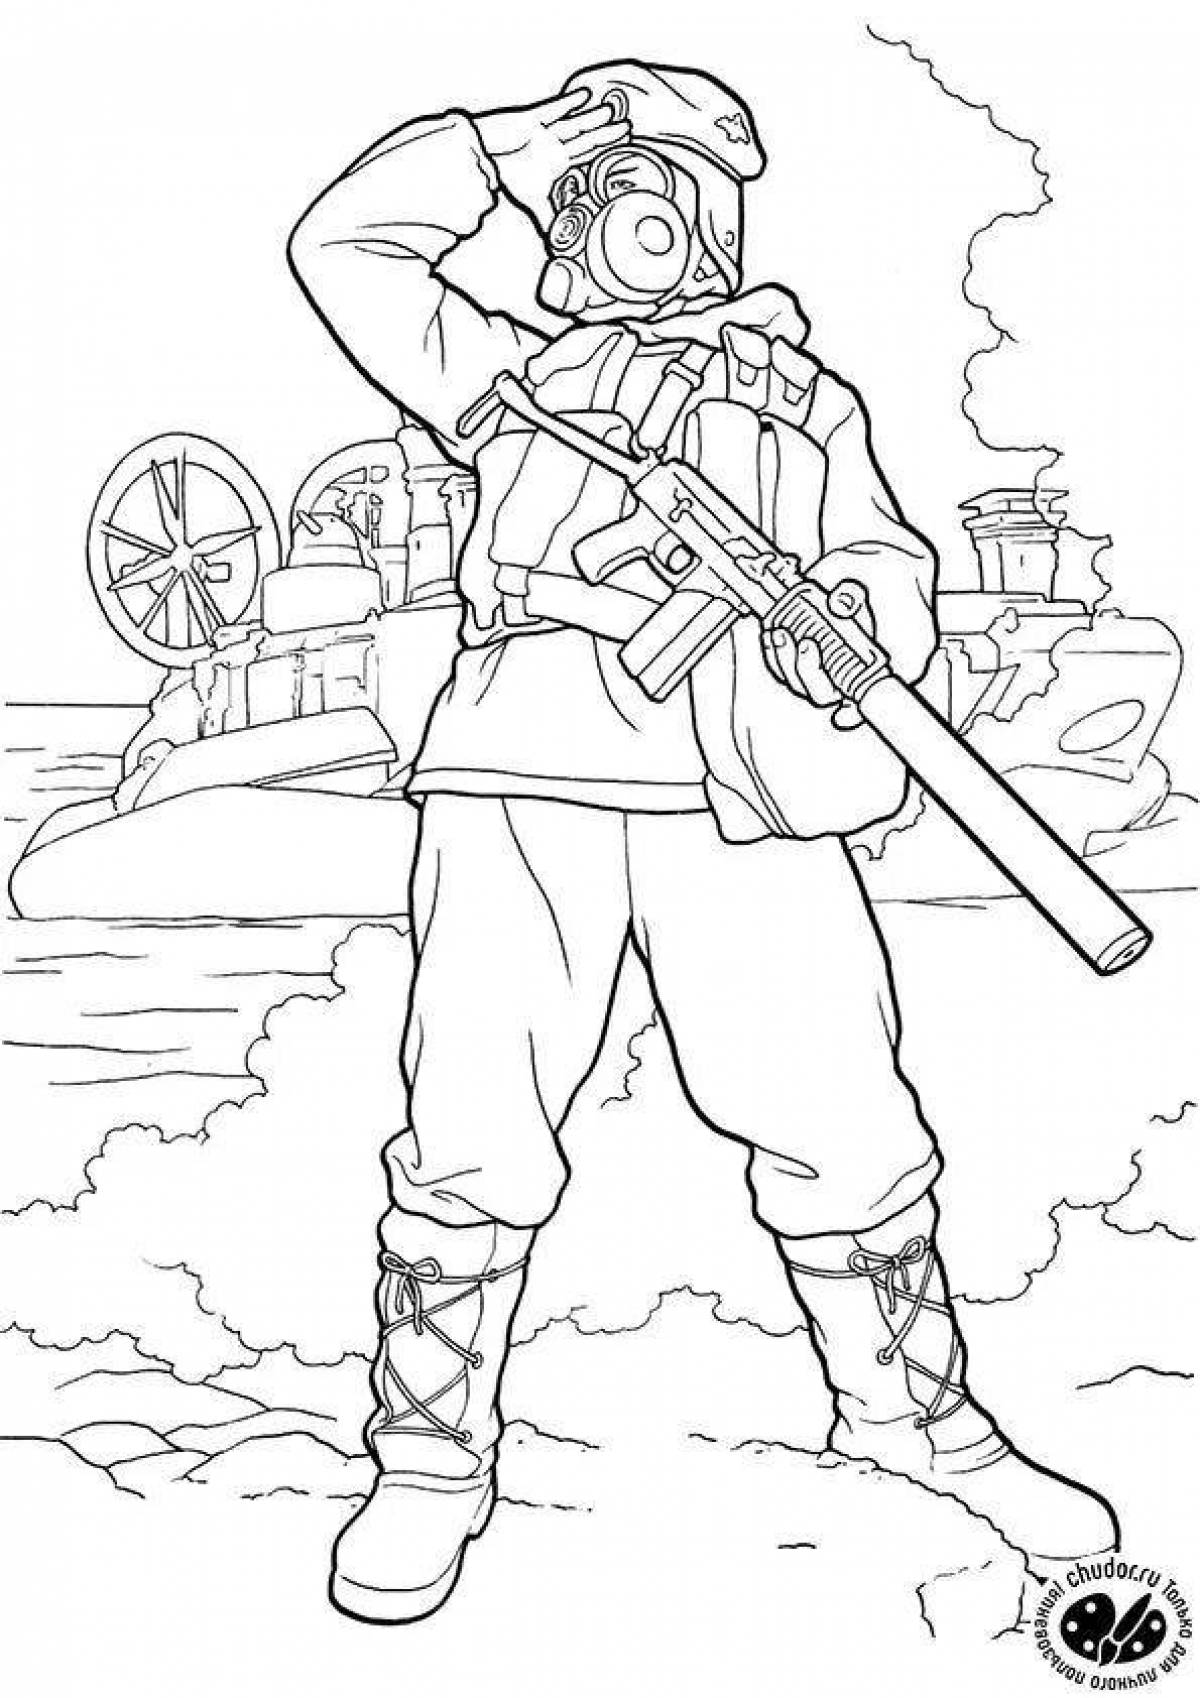 Jolly dad February 23 coloring pages